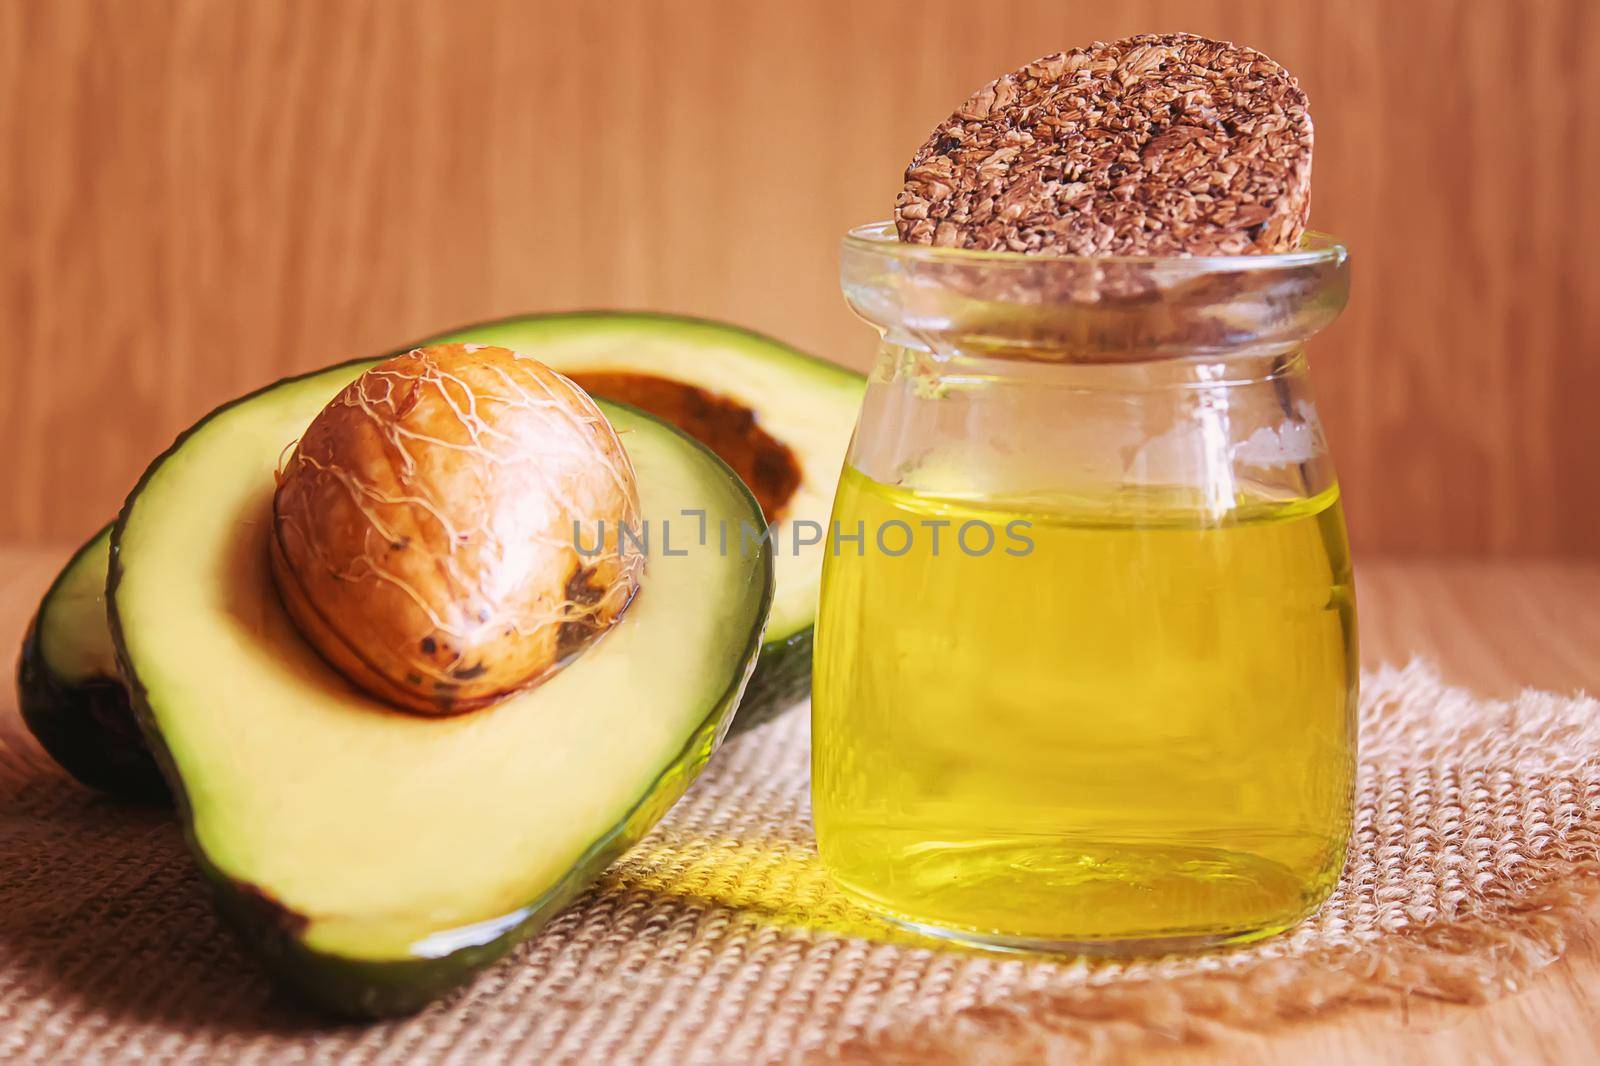 Avocado and avocado oil on wooden background. Selective focus.food